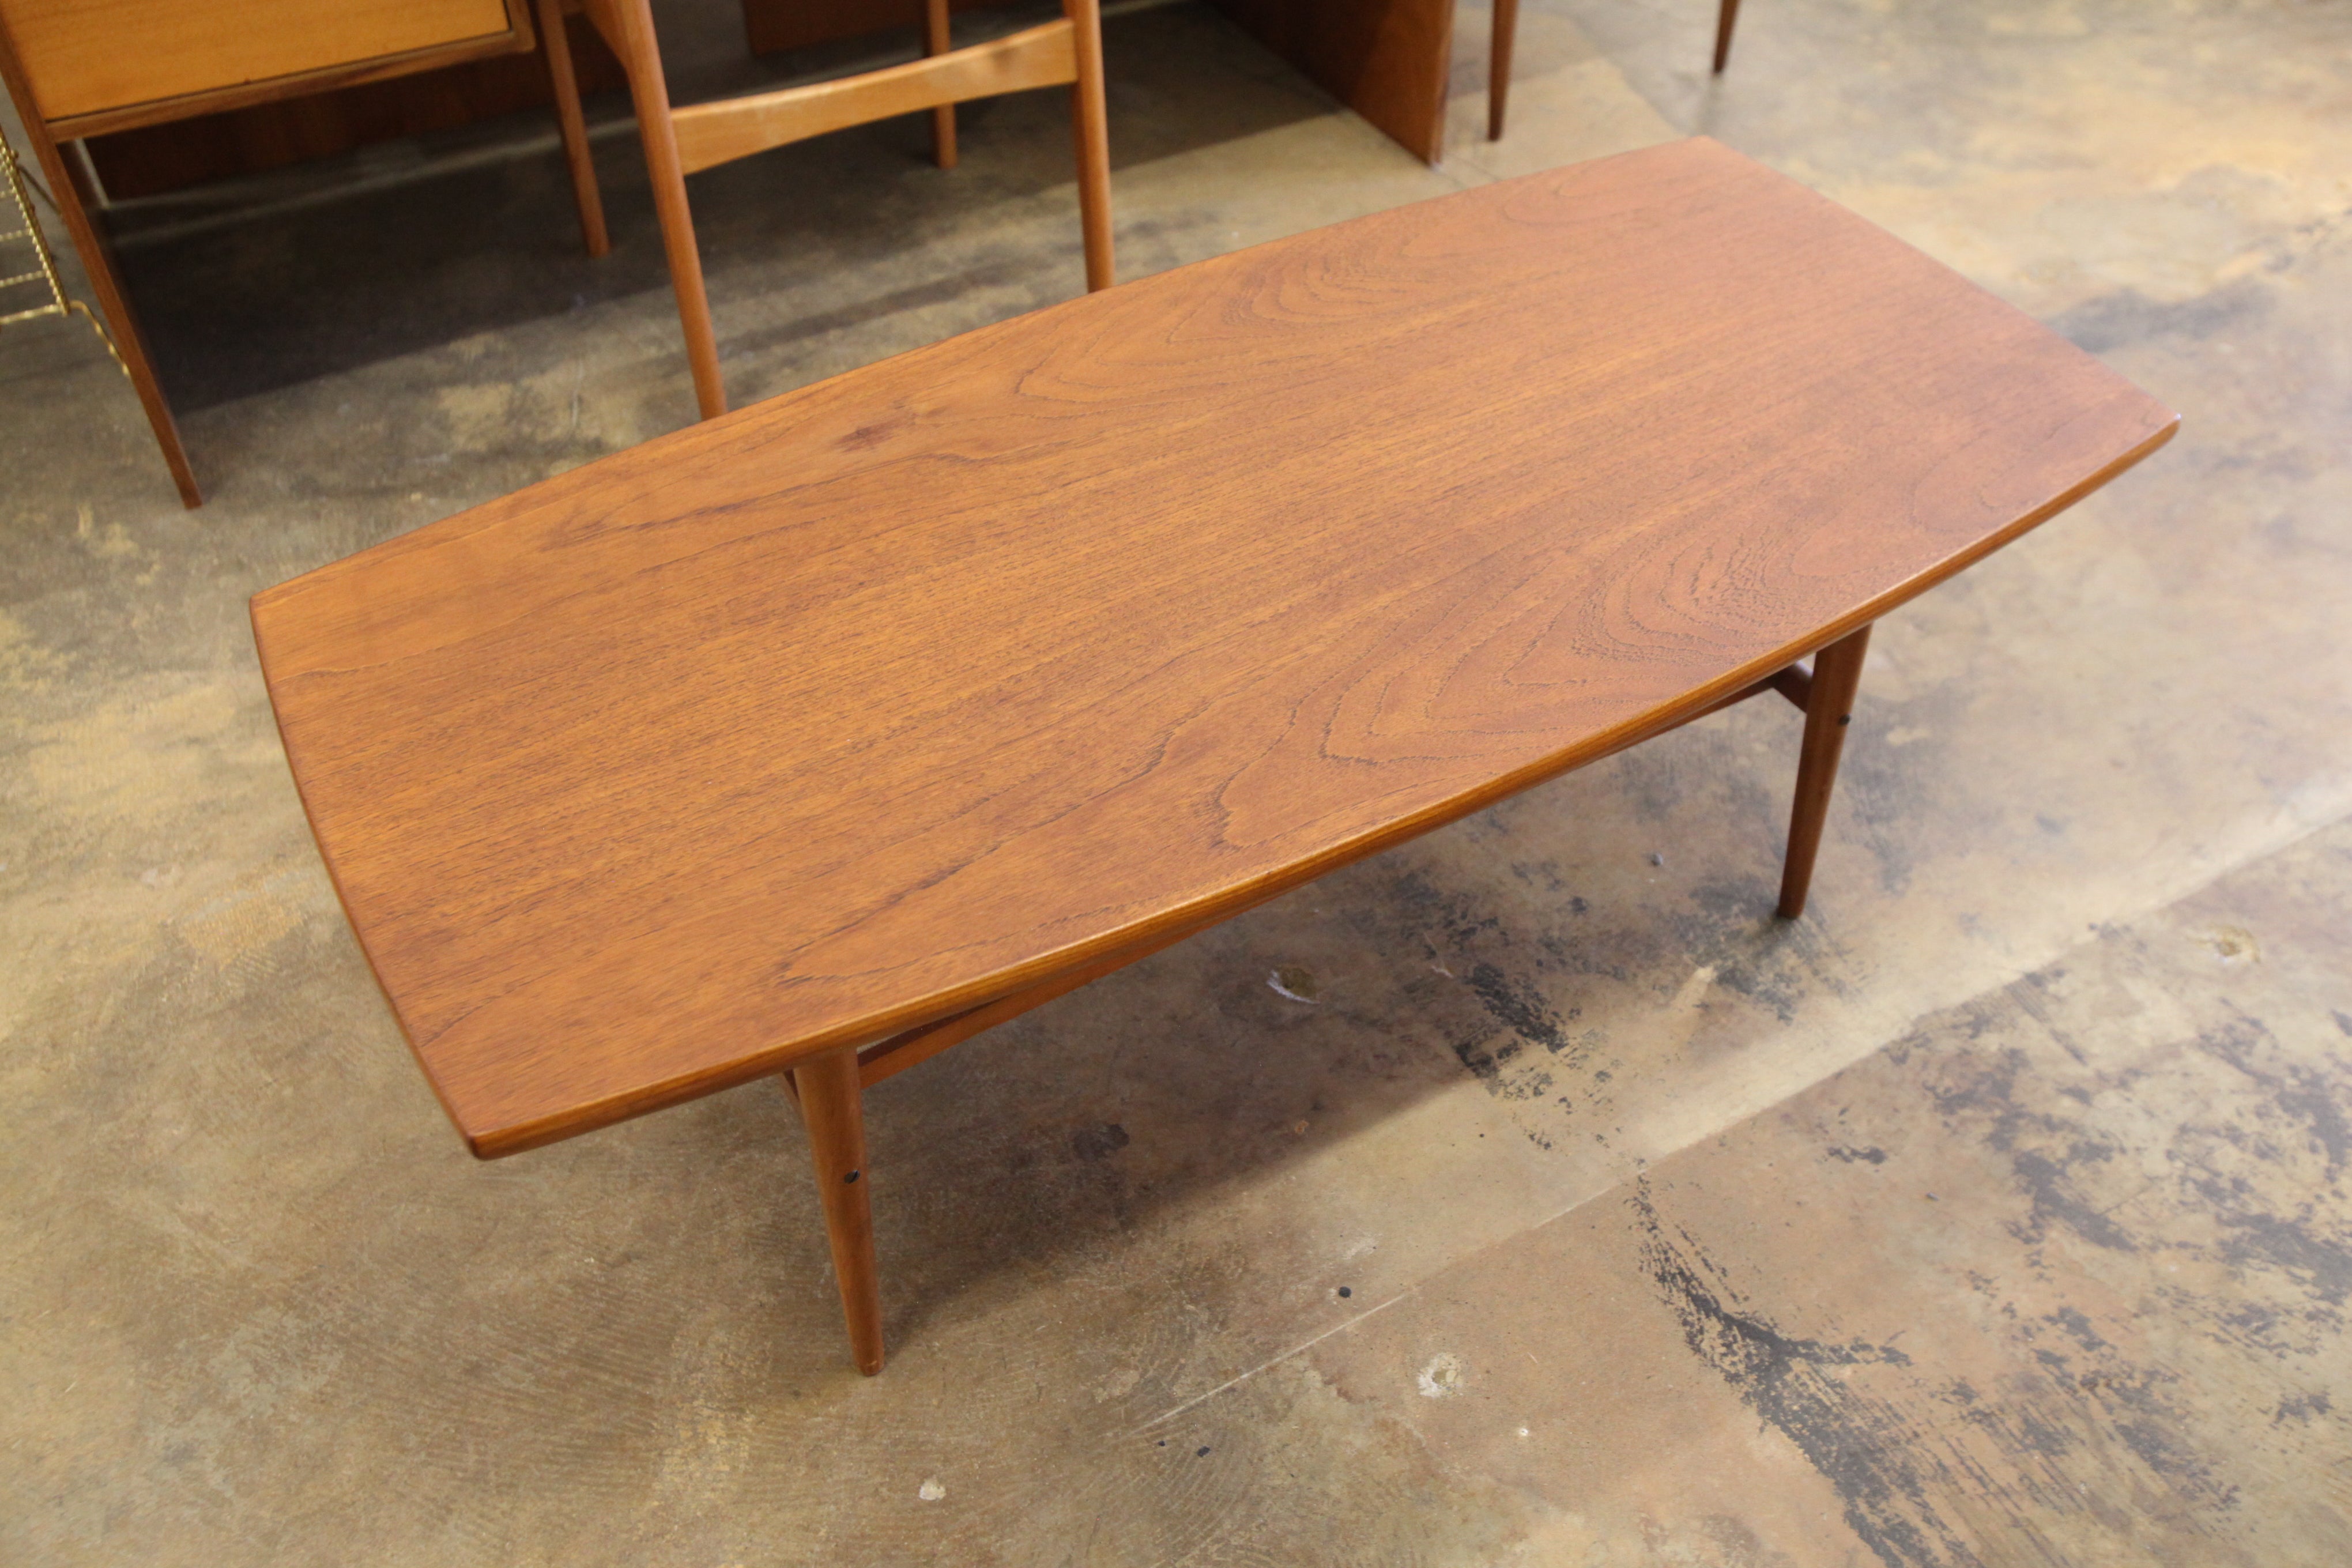 Small Vintage Teak Surfboard Style Coffee Table (43.5"L x 21"W x 16.25"H)